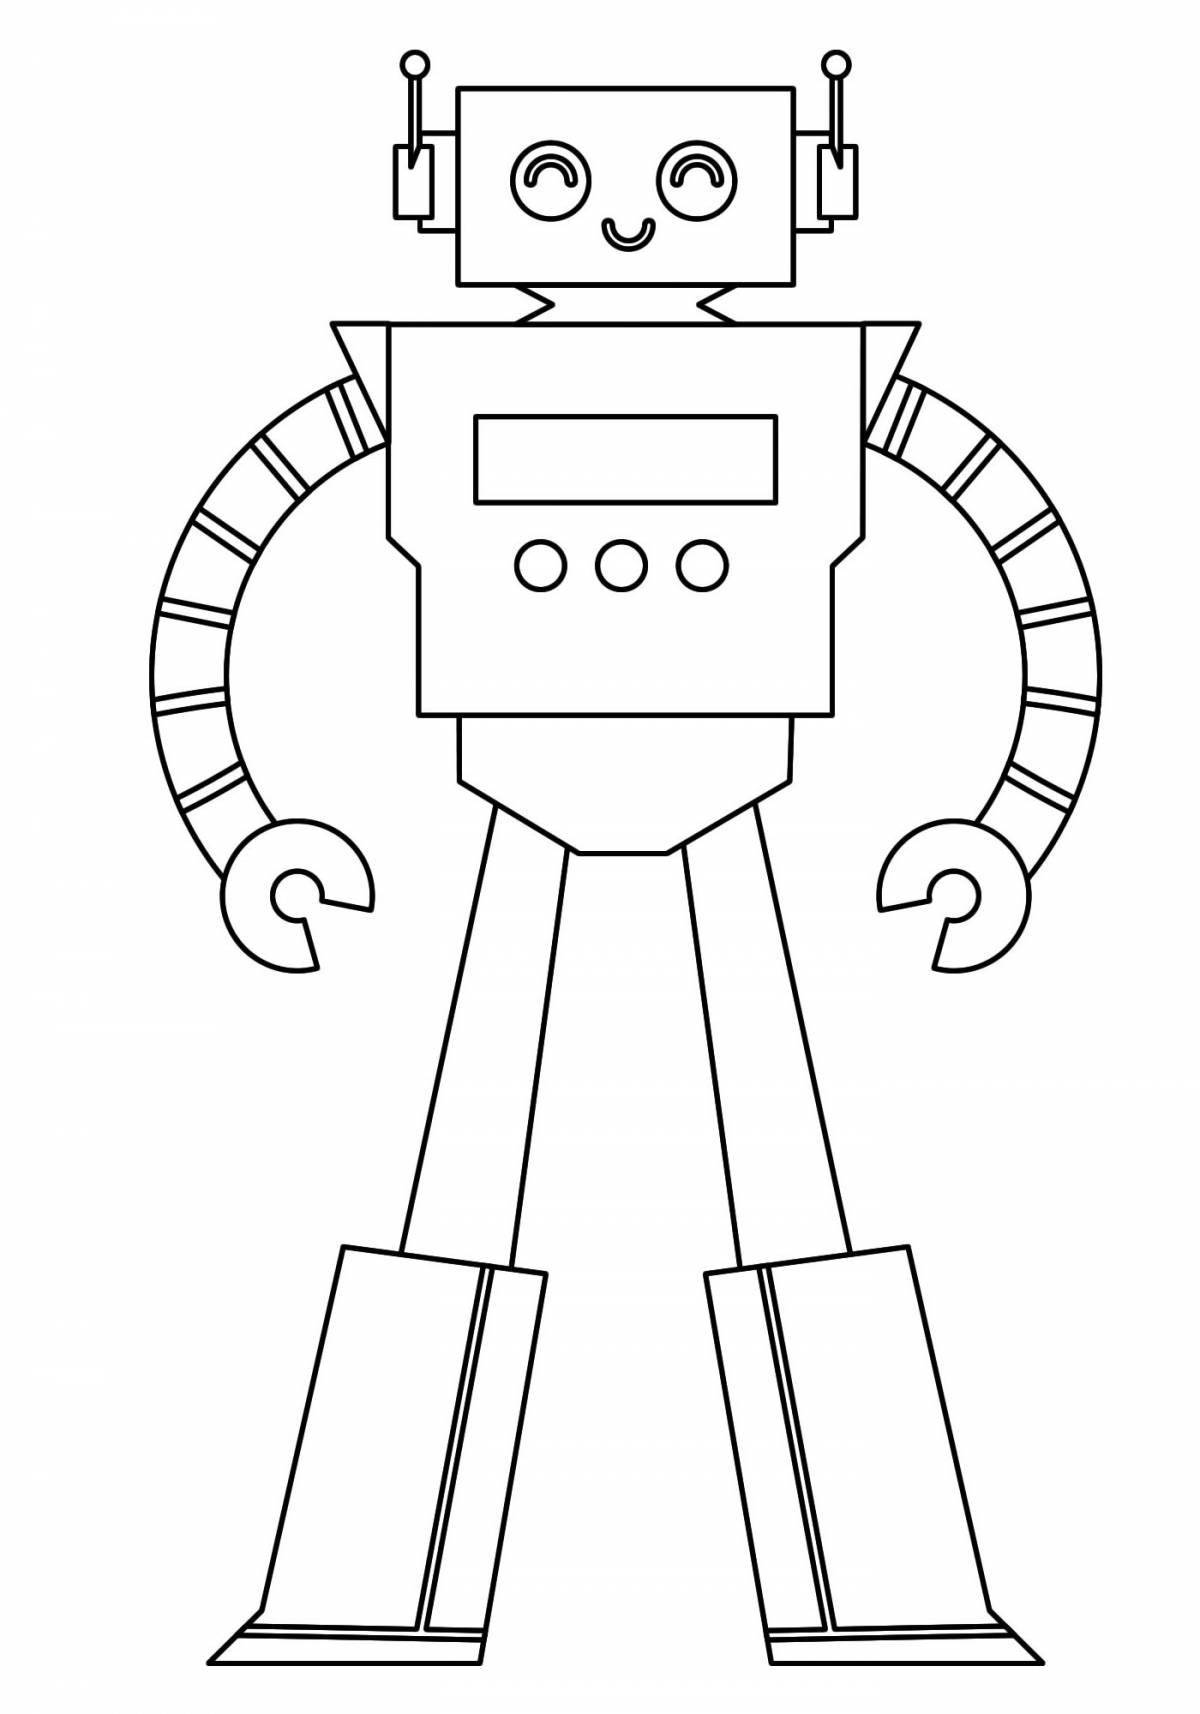 Fancy paper robot coloring page